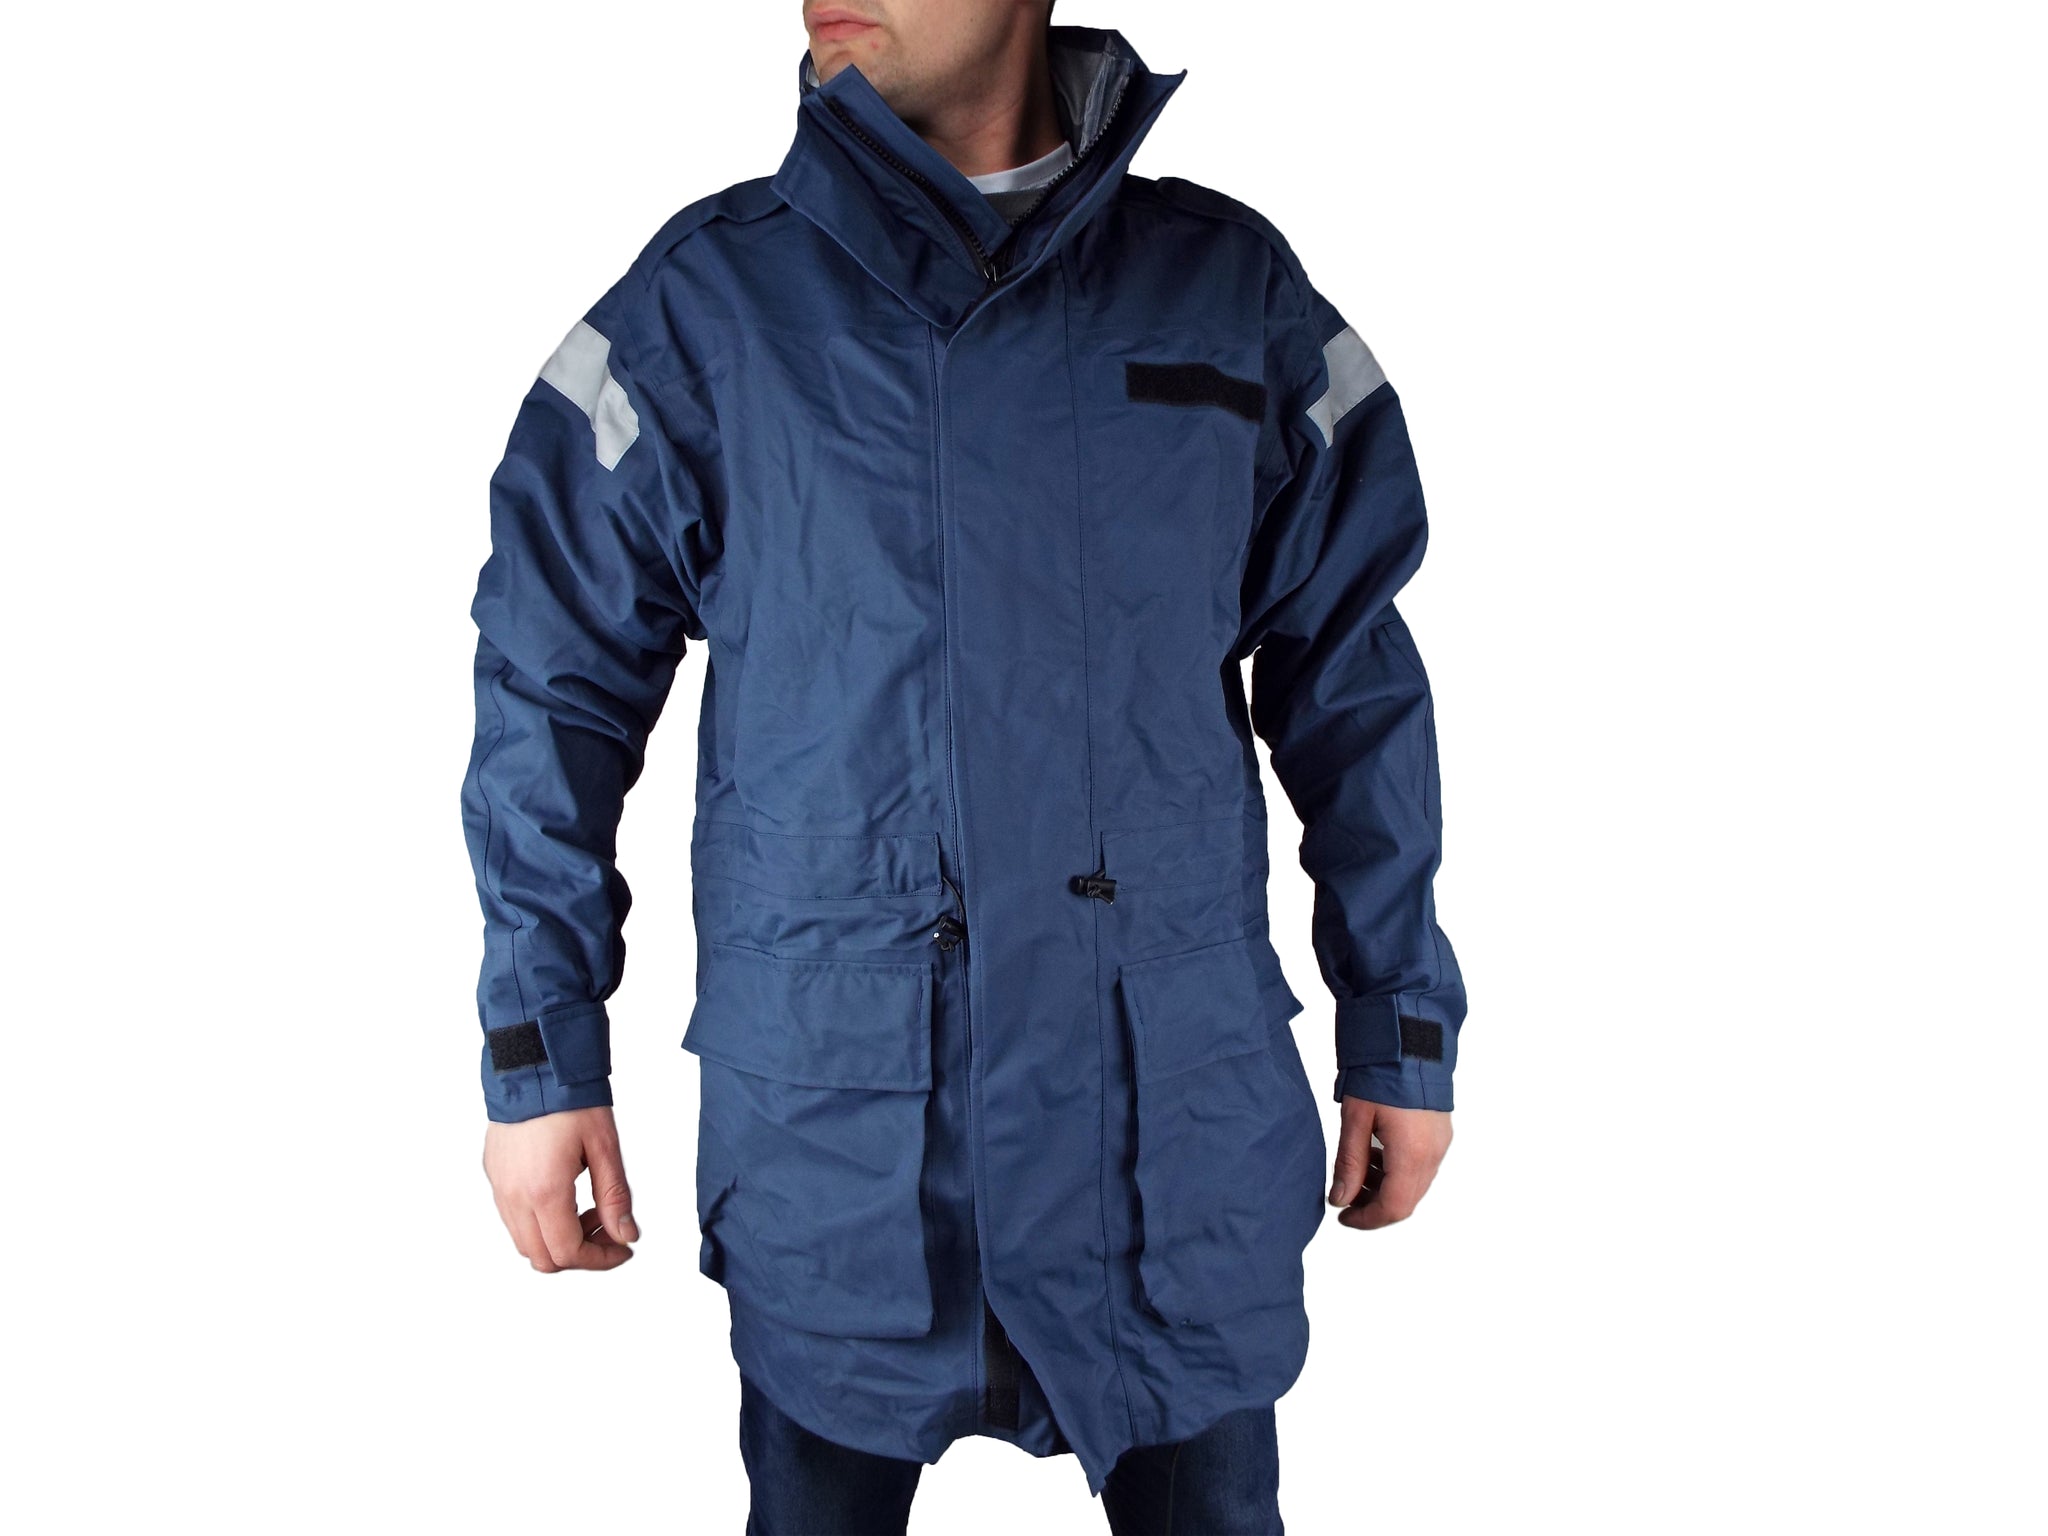 Blue RAF Gore-Tex Jacket - With Hood - Grade 1 - Forces Uniform and Kit